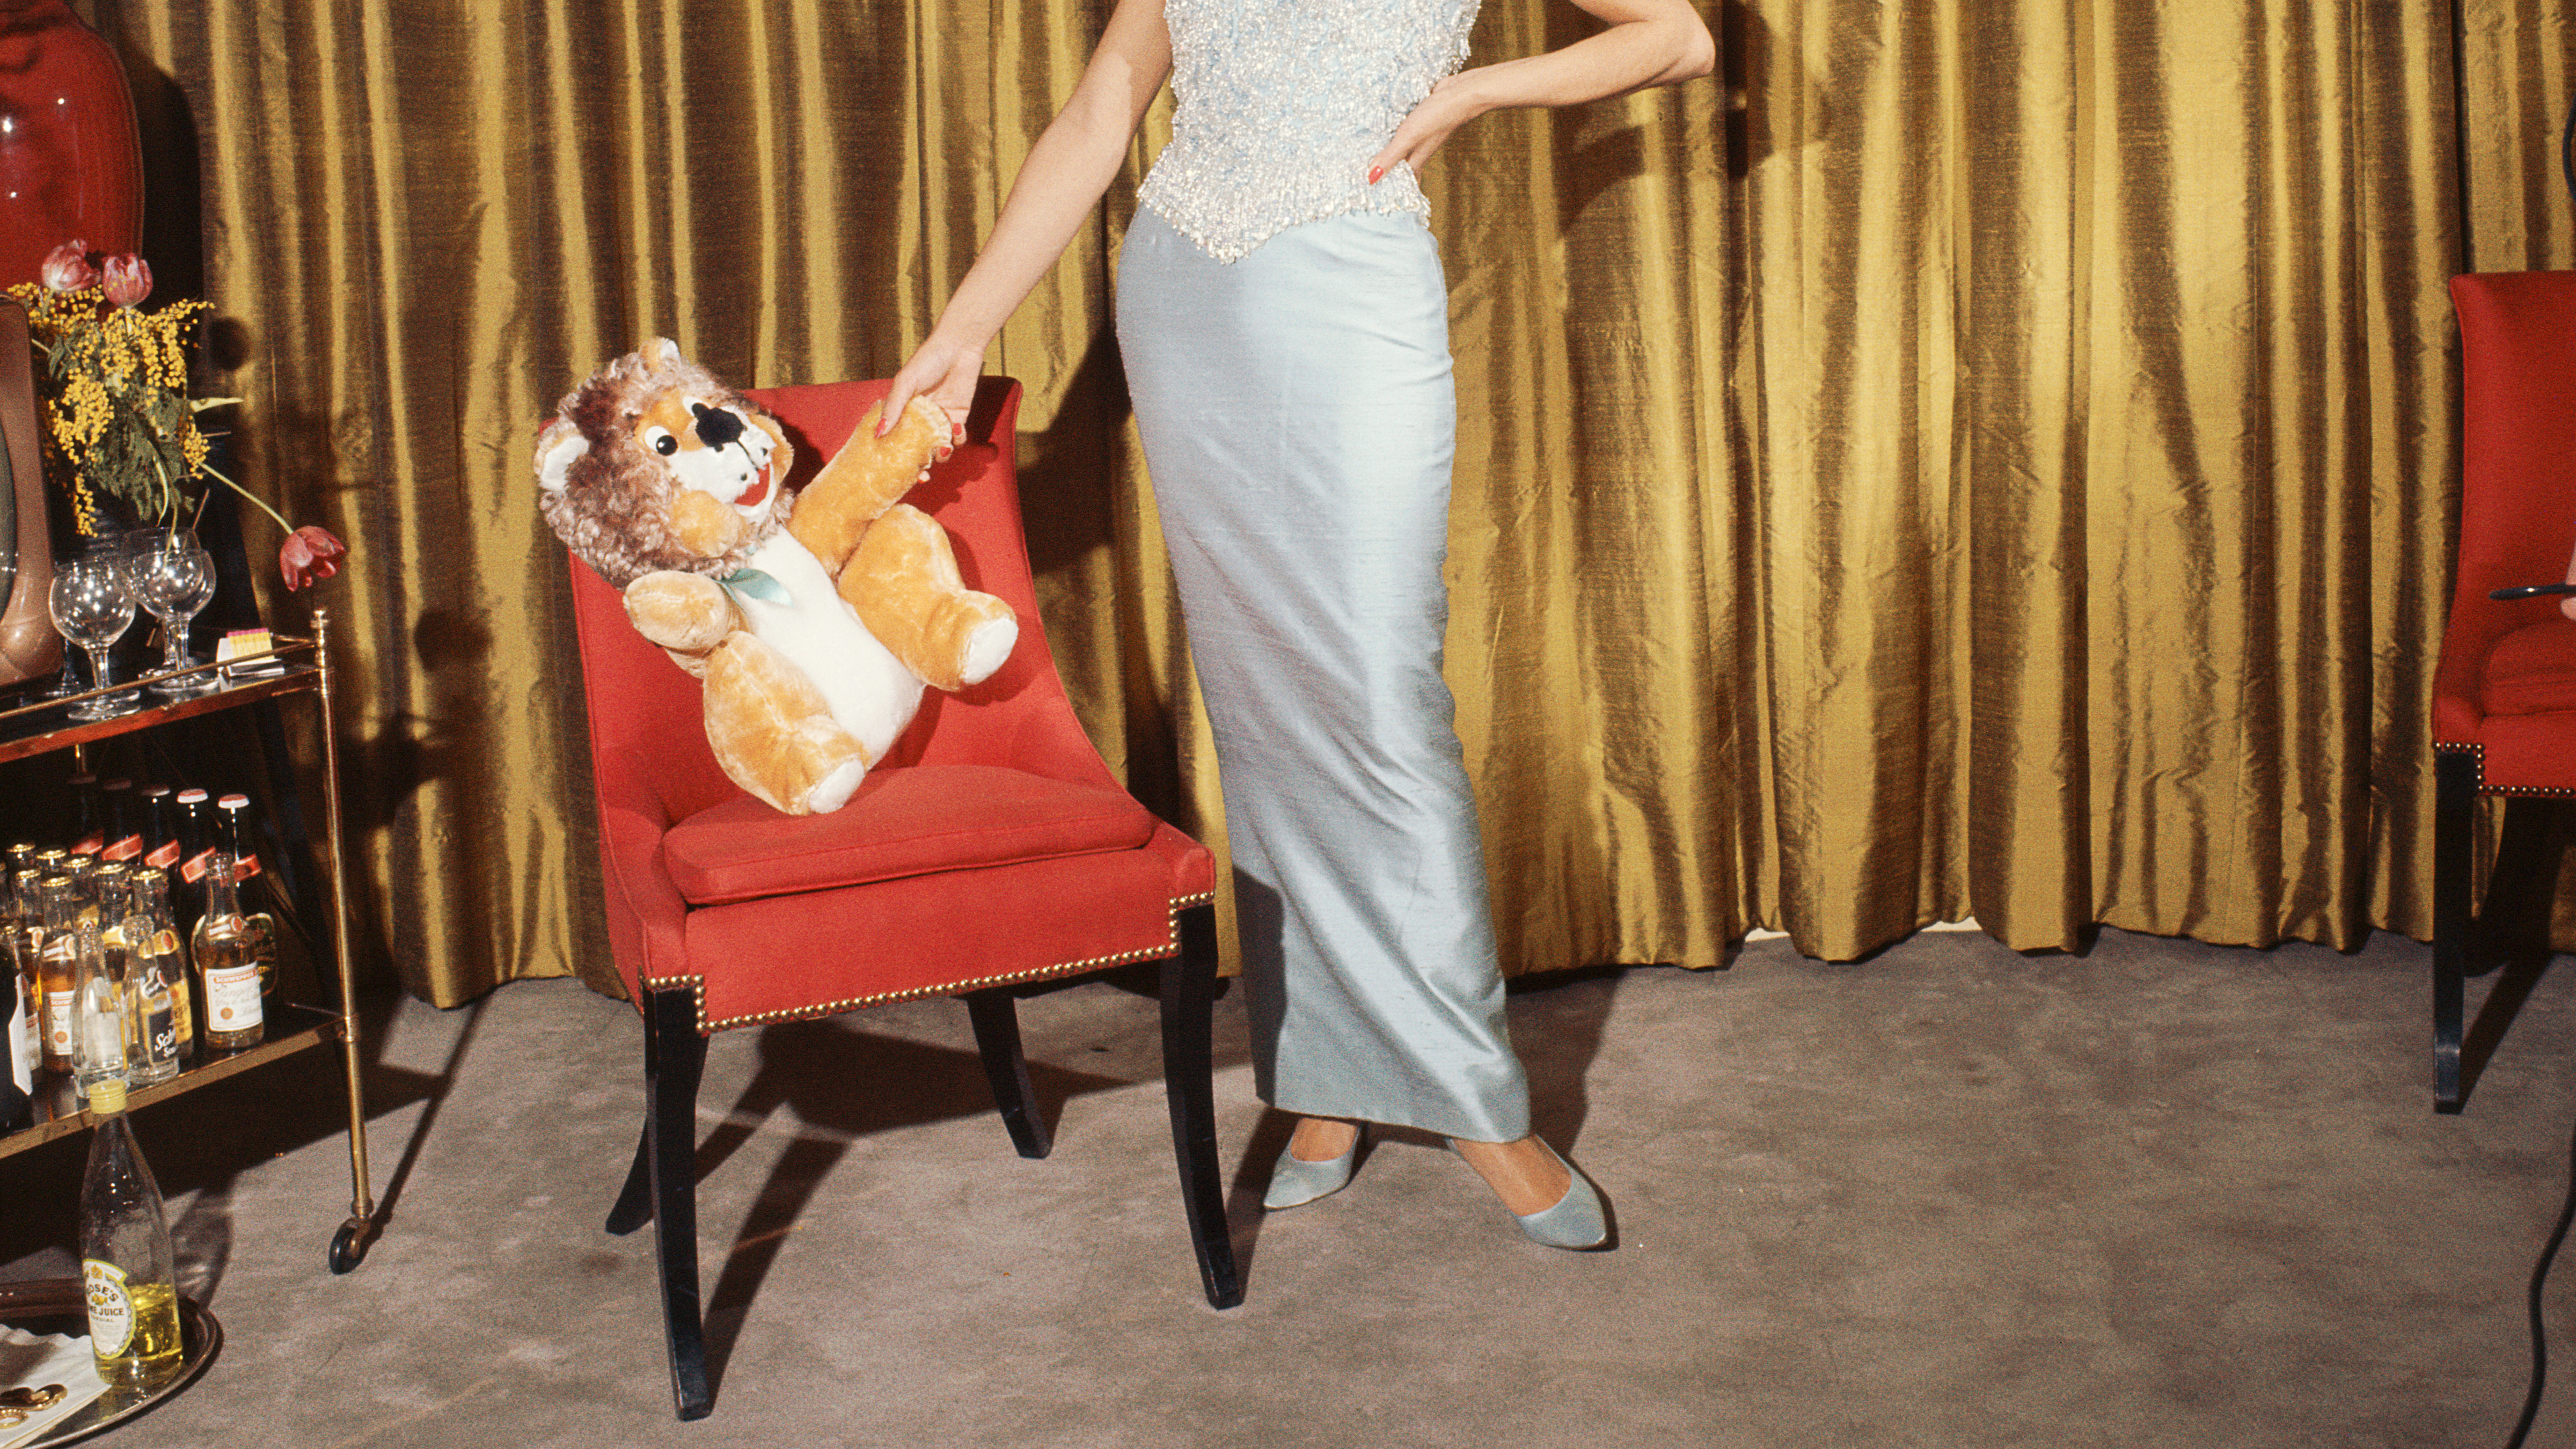 A vintage photo of a woman wearing a floor-length dress and holding a stuffed animal